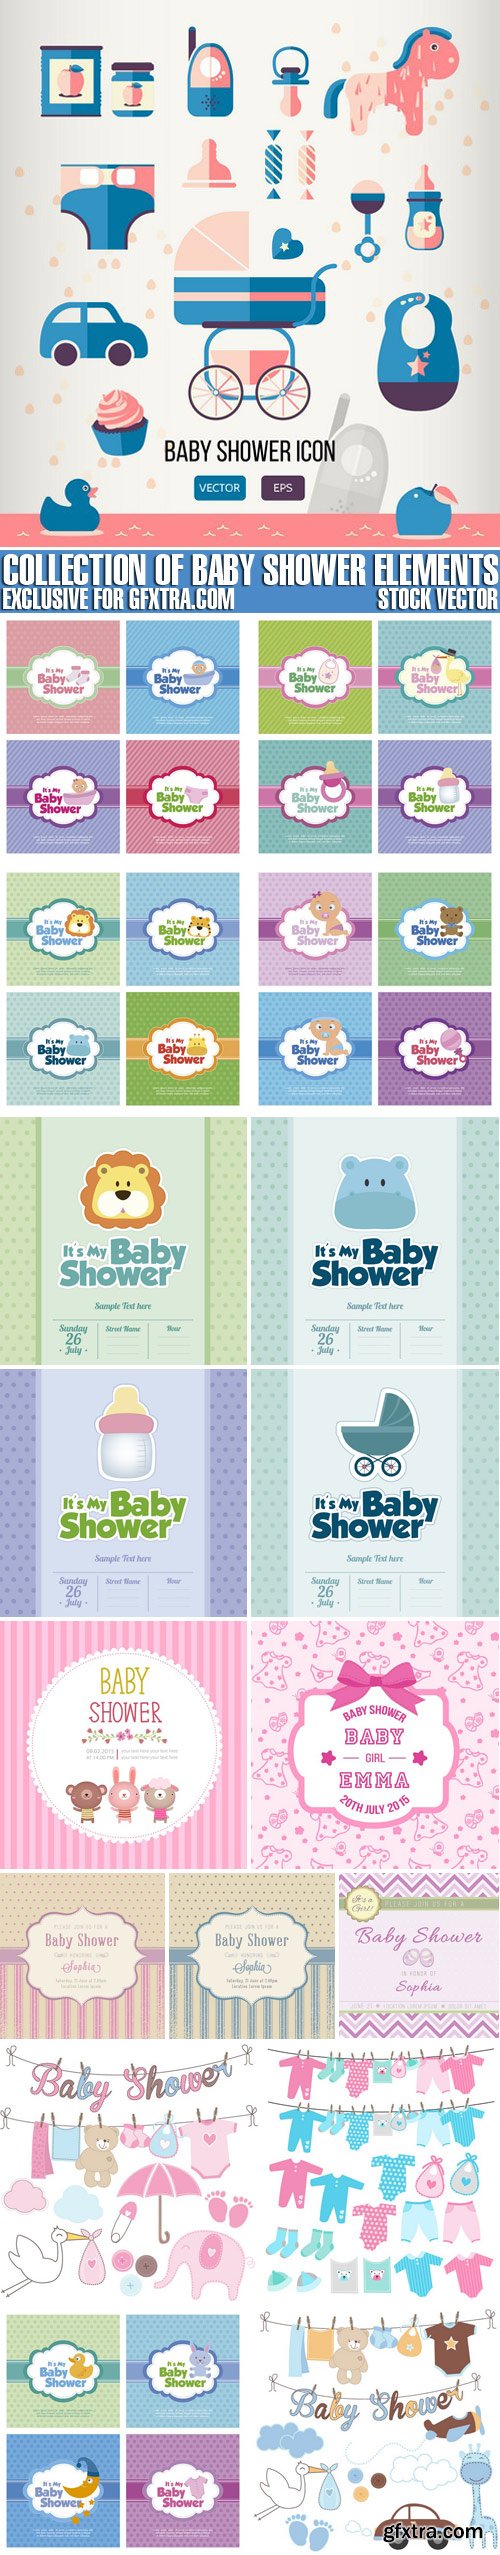 Stock Vectors - Collection Of Baby Shower Elements